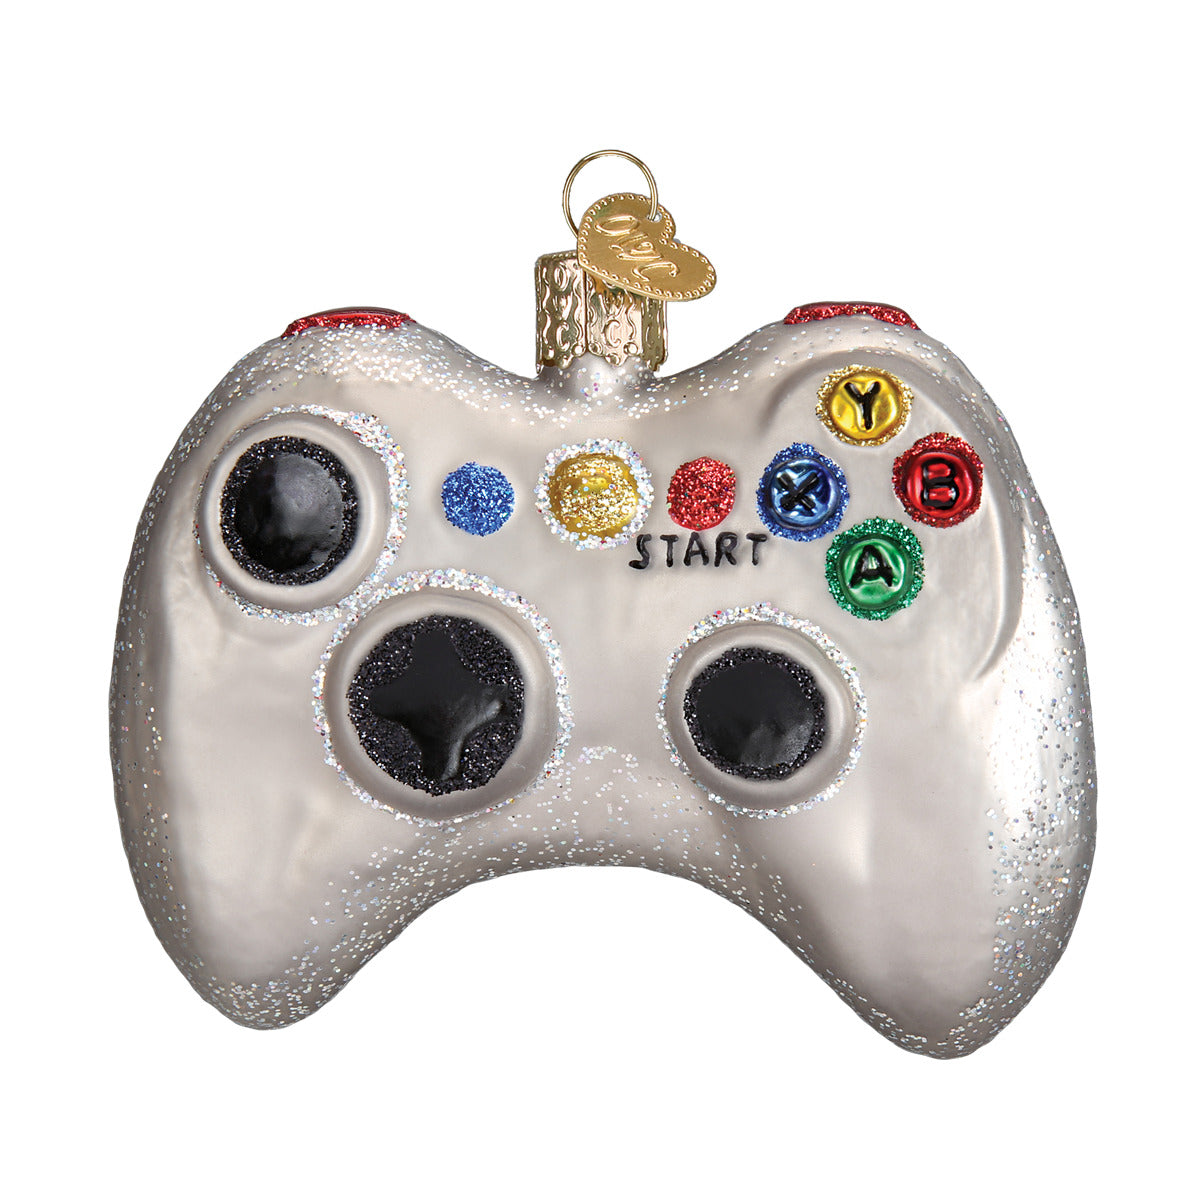 Old World Christmas Video Game Controller Ornament